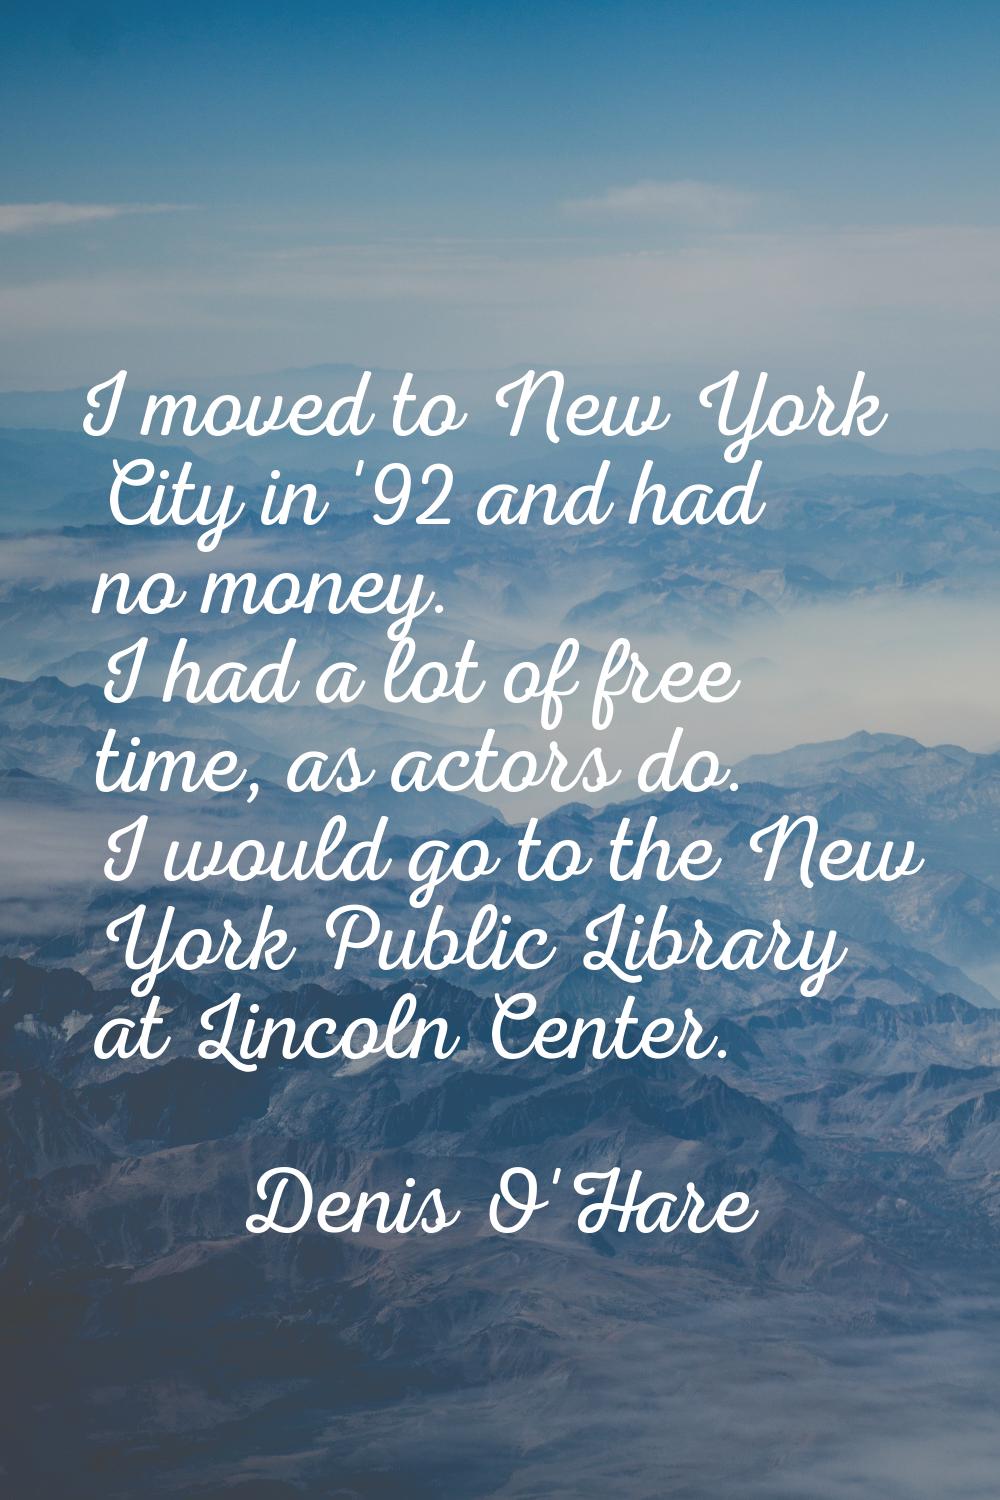 I moved to New York City in '92 and had no money. I had a lot of free time, as actors do. I would g